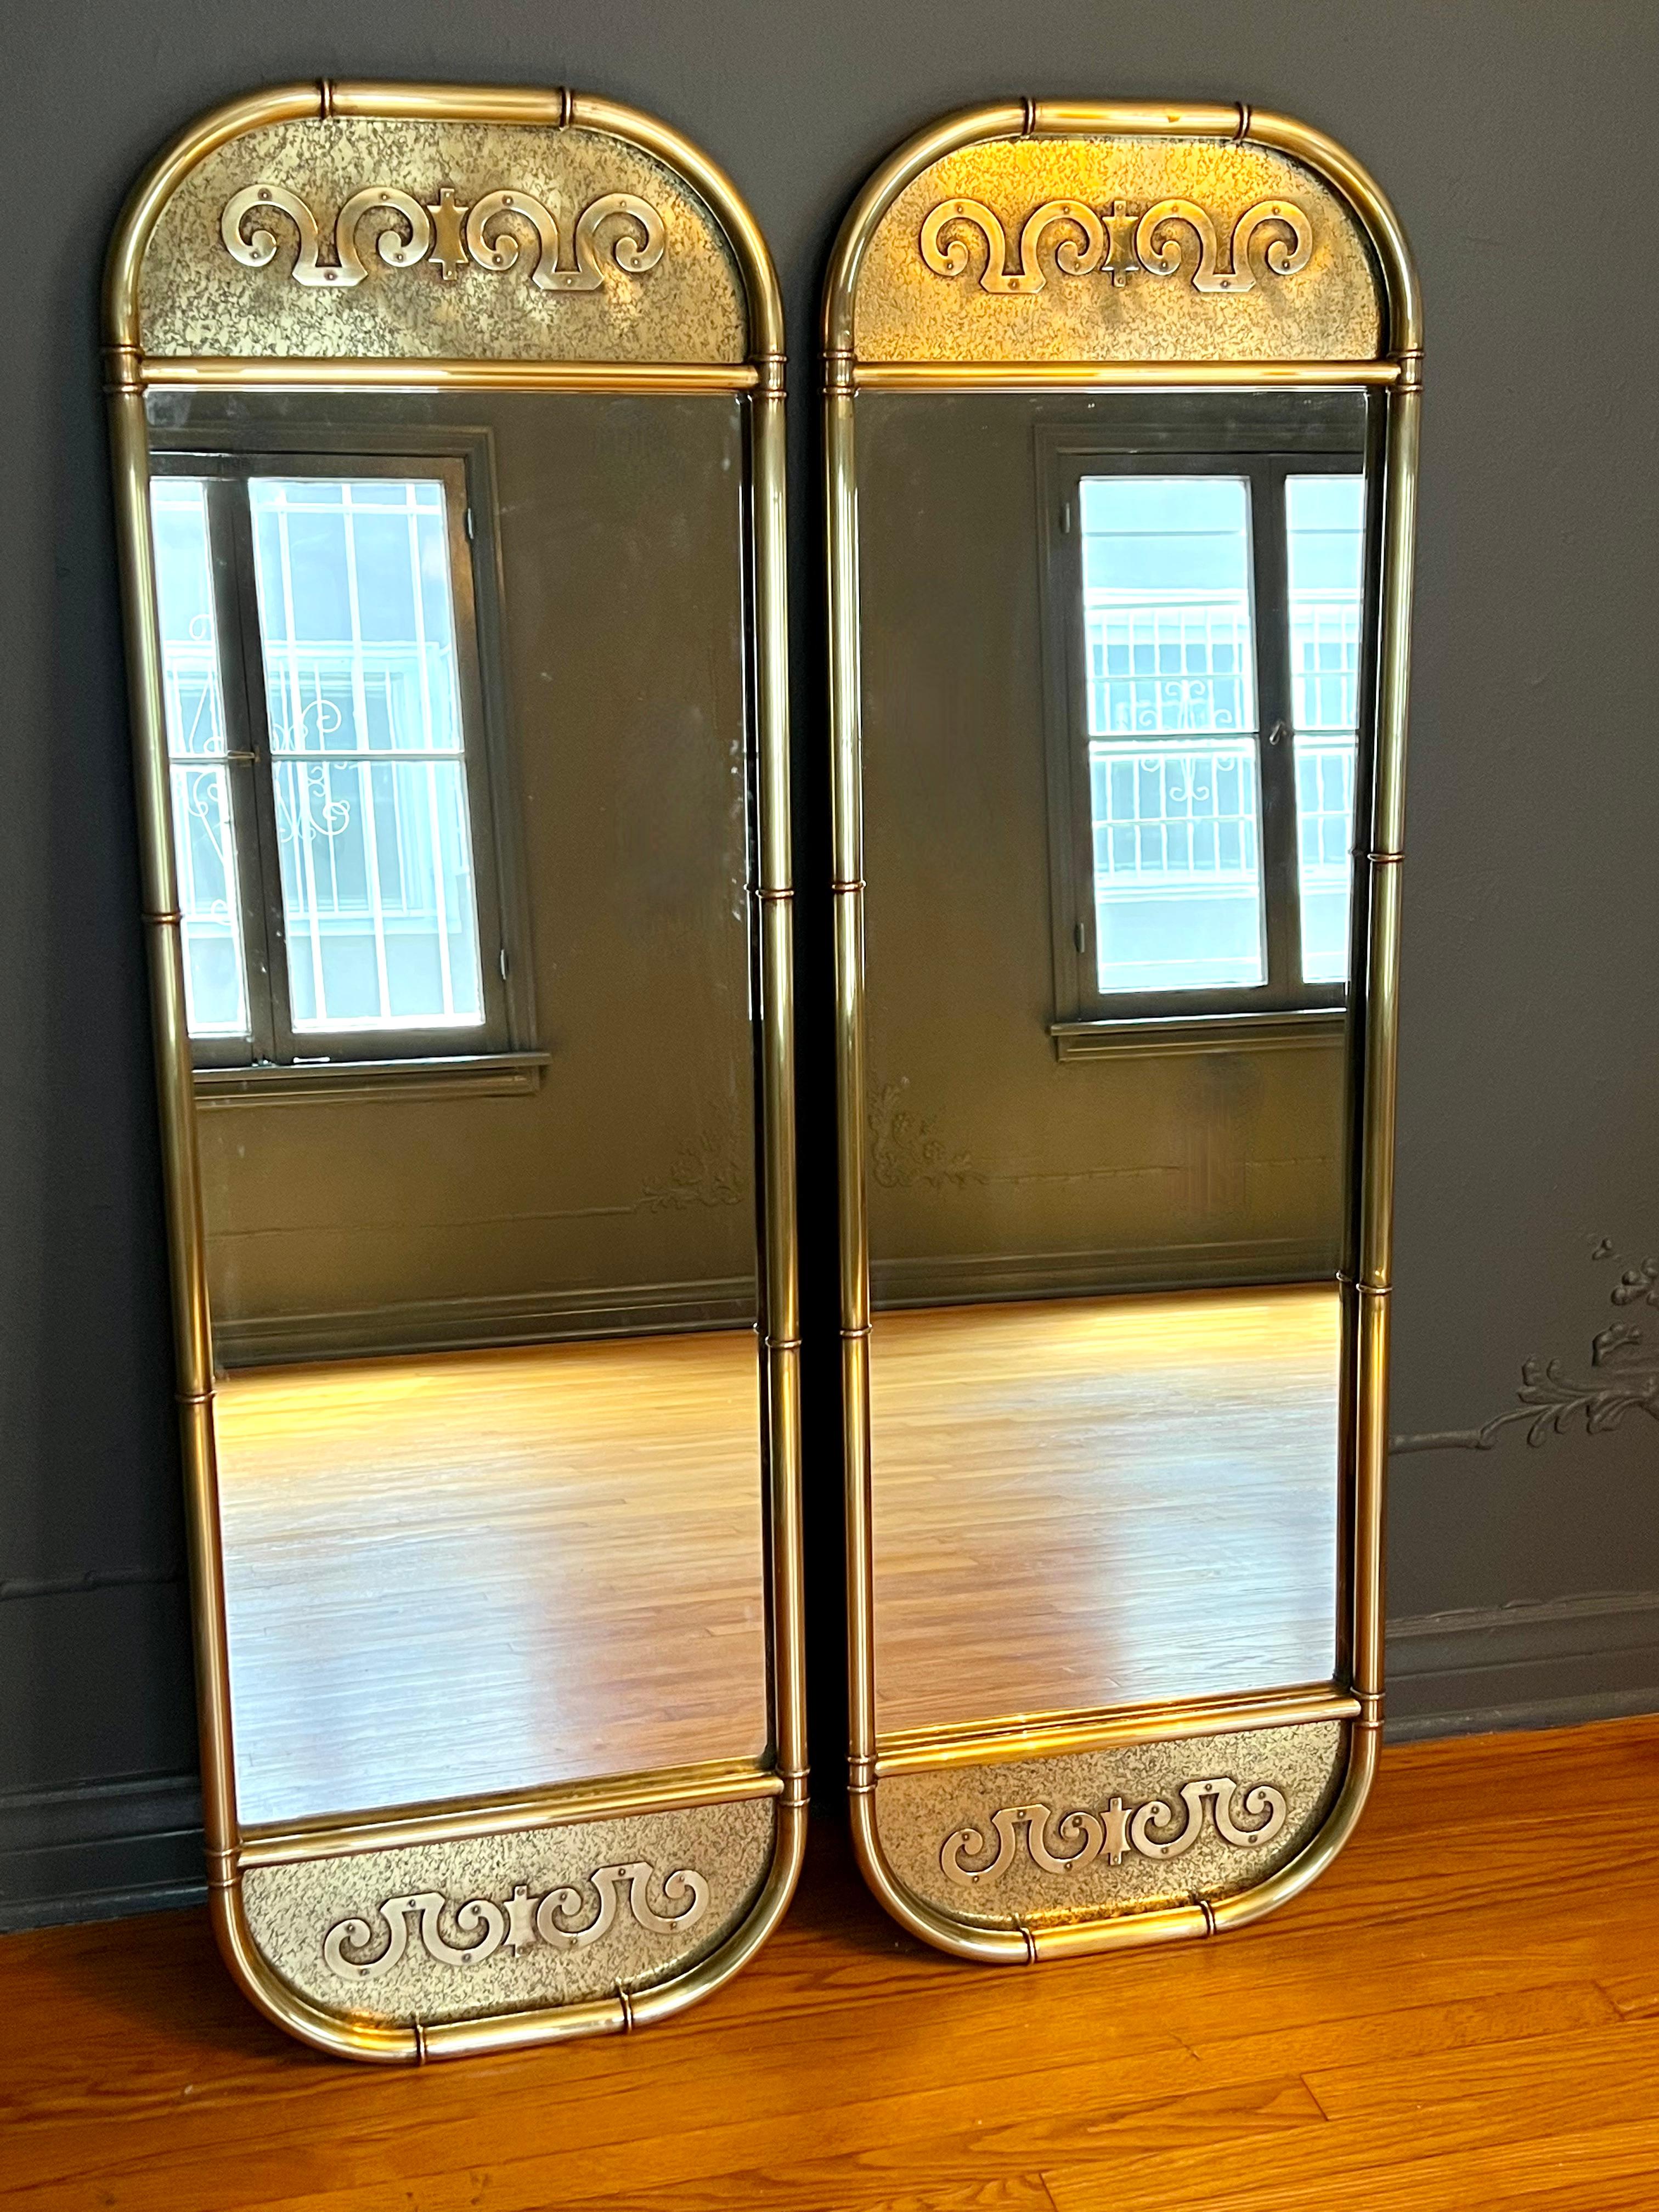 A pair of mid century brass Mastercraft wall mirrors. The pair are very tall at 56.5